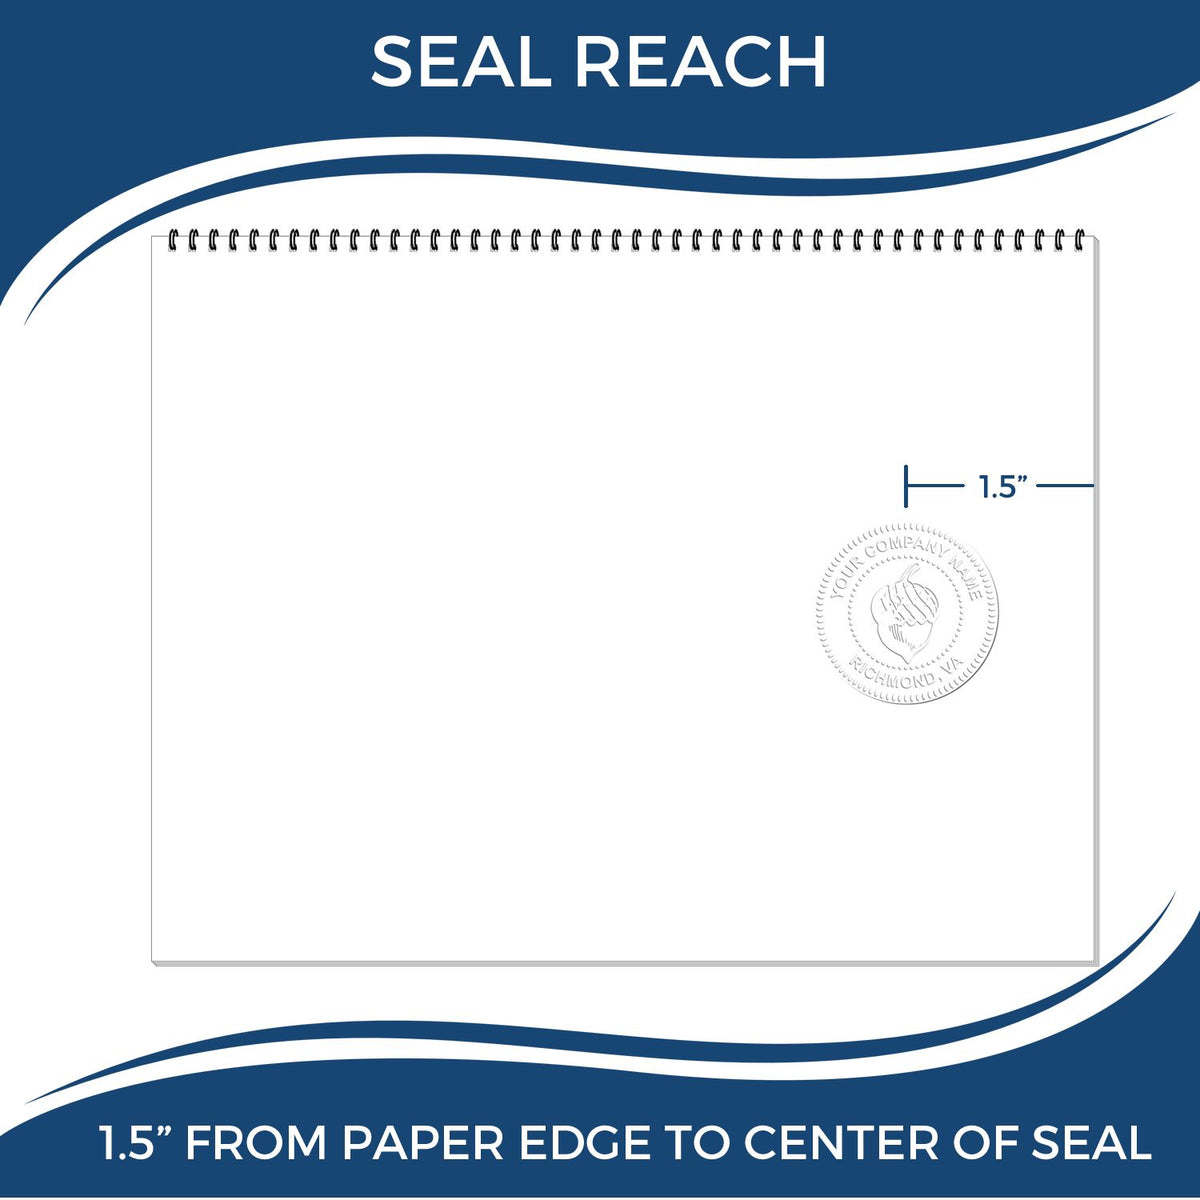 An infographic showing the seal reach which is represented by a ruler and a miniature seal image of the New York Desk Architect Embossing Seal